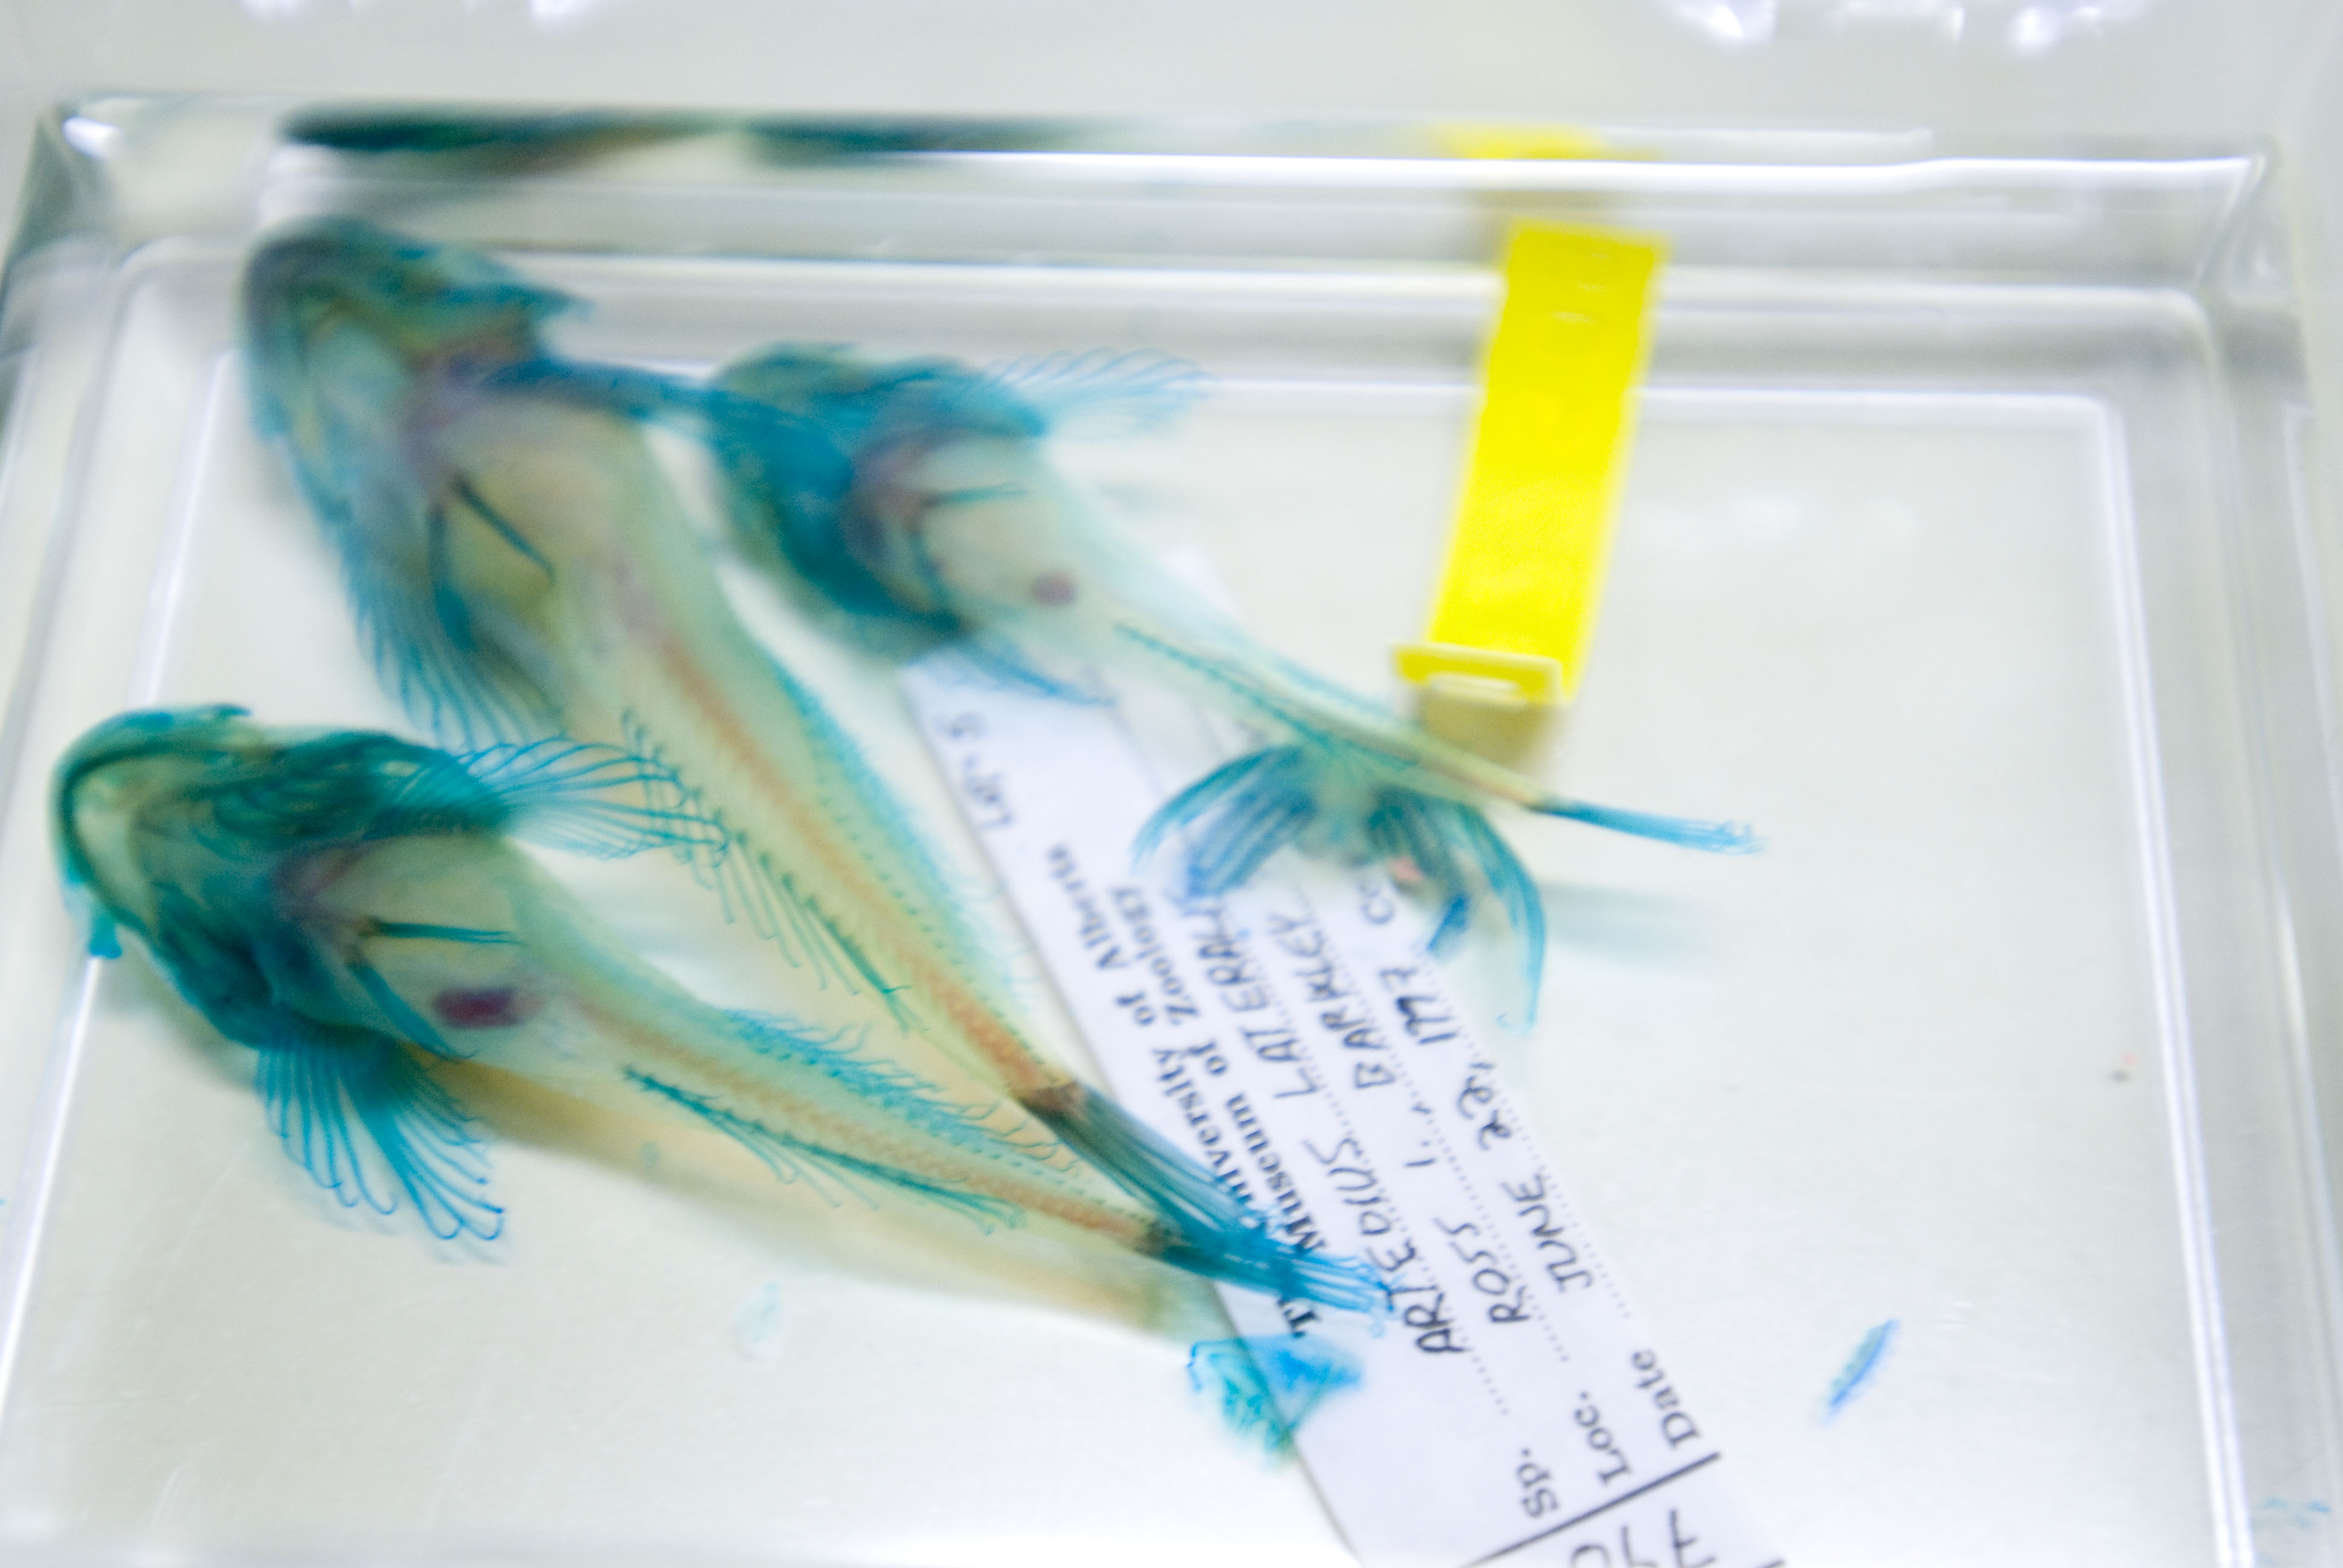 Three preserved fish specimens, with stained turquoise skeletal structures.